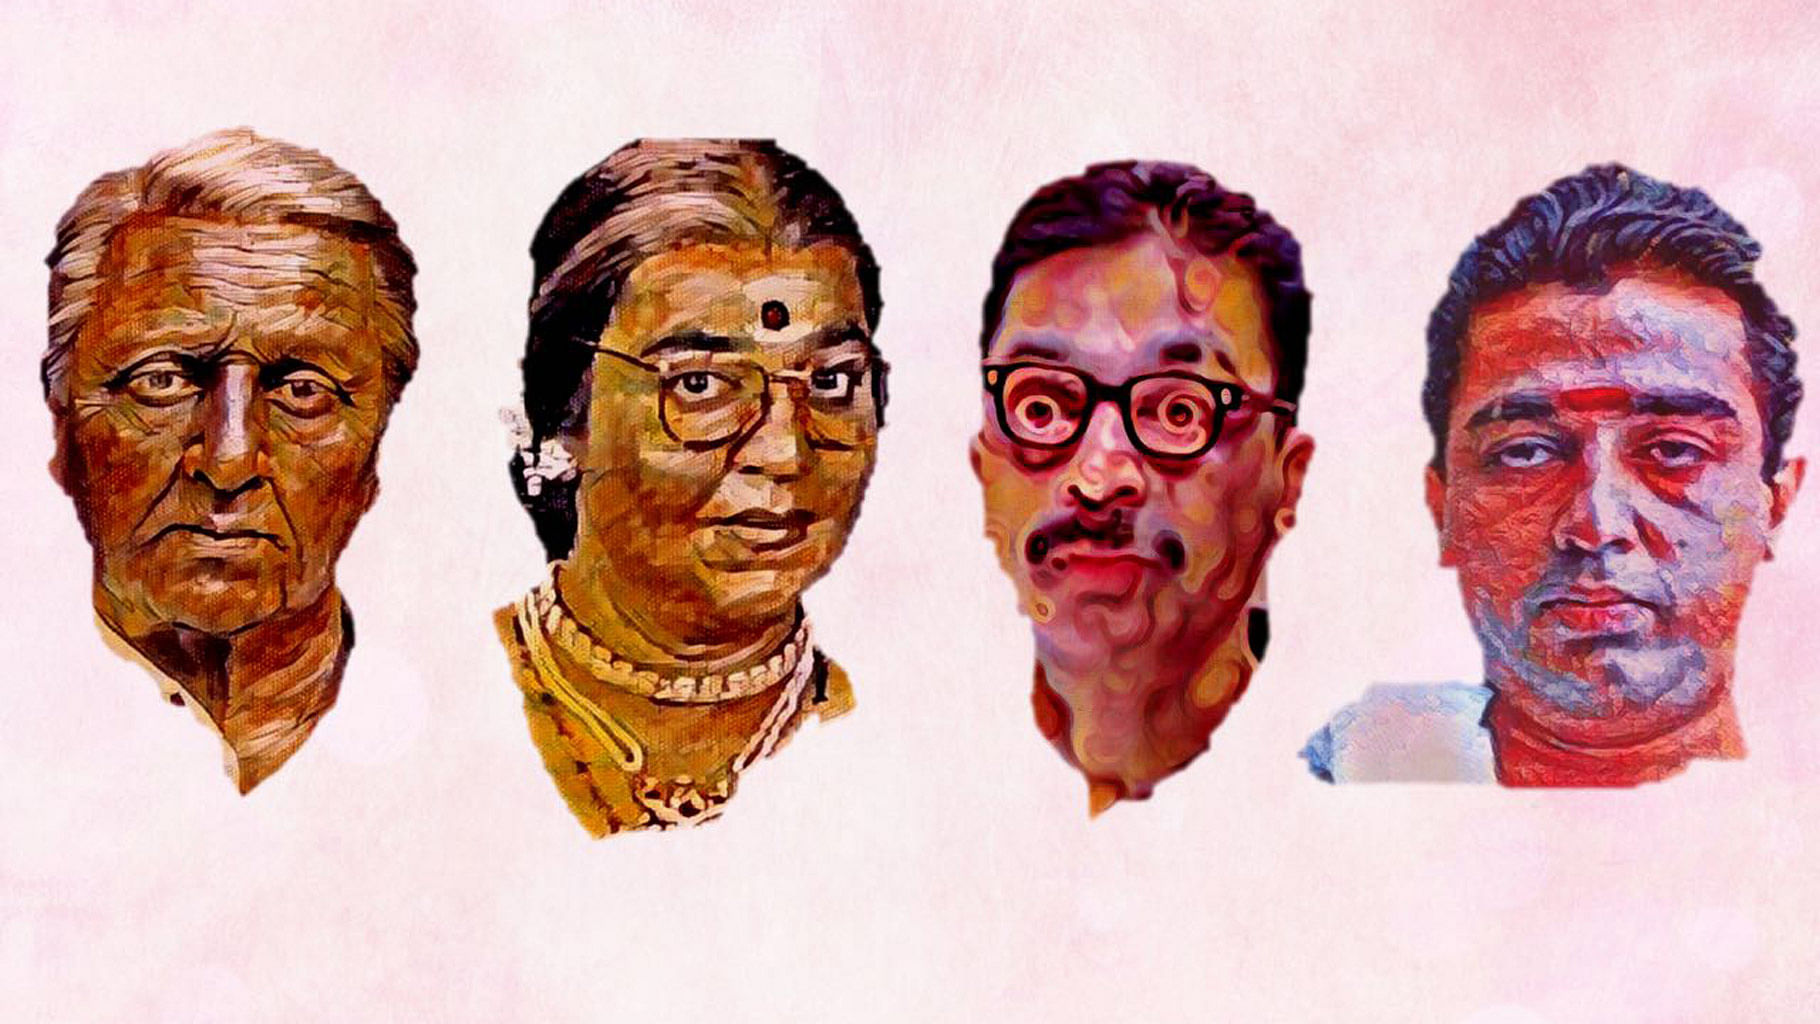 For over five decades, the accused, Kamal Haasan has conned the public by adopting various disguises and personas. (Photo: Vikram Venkateswaran, who is rather pleased with himself right now)